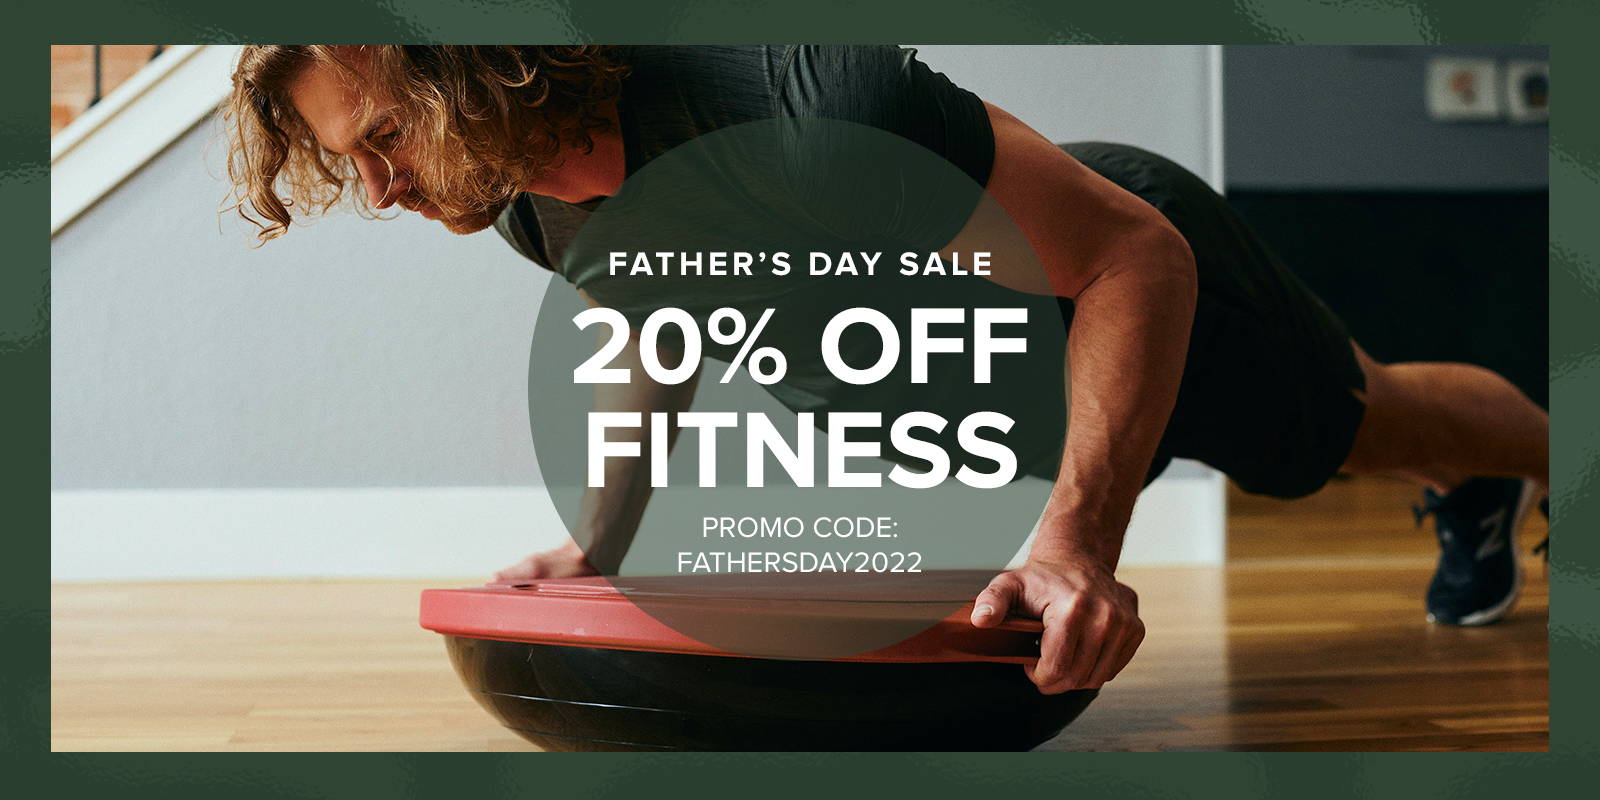 Father's Day Sale CODE: FATHERSDAY2022